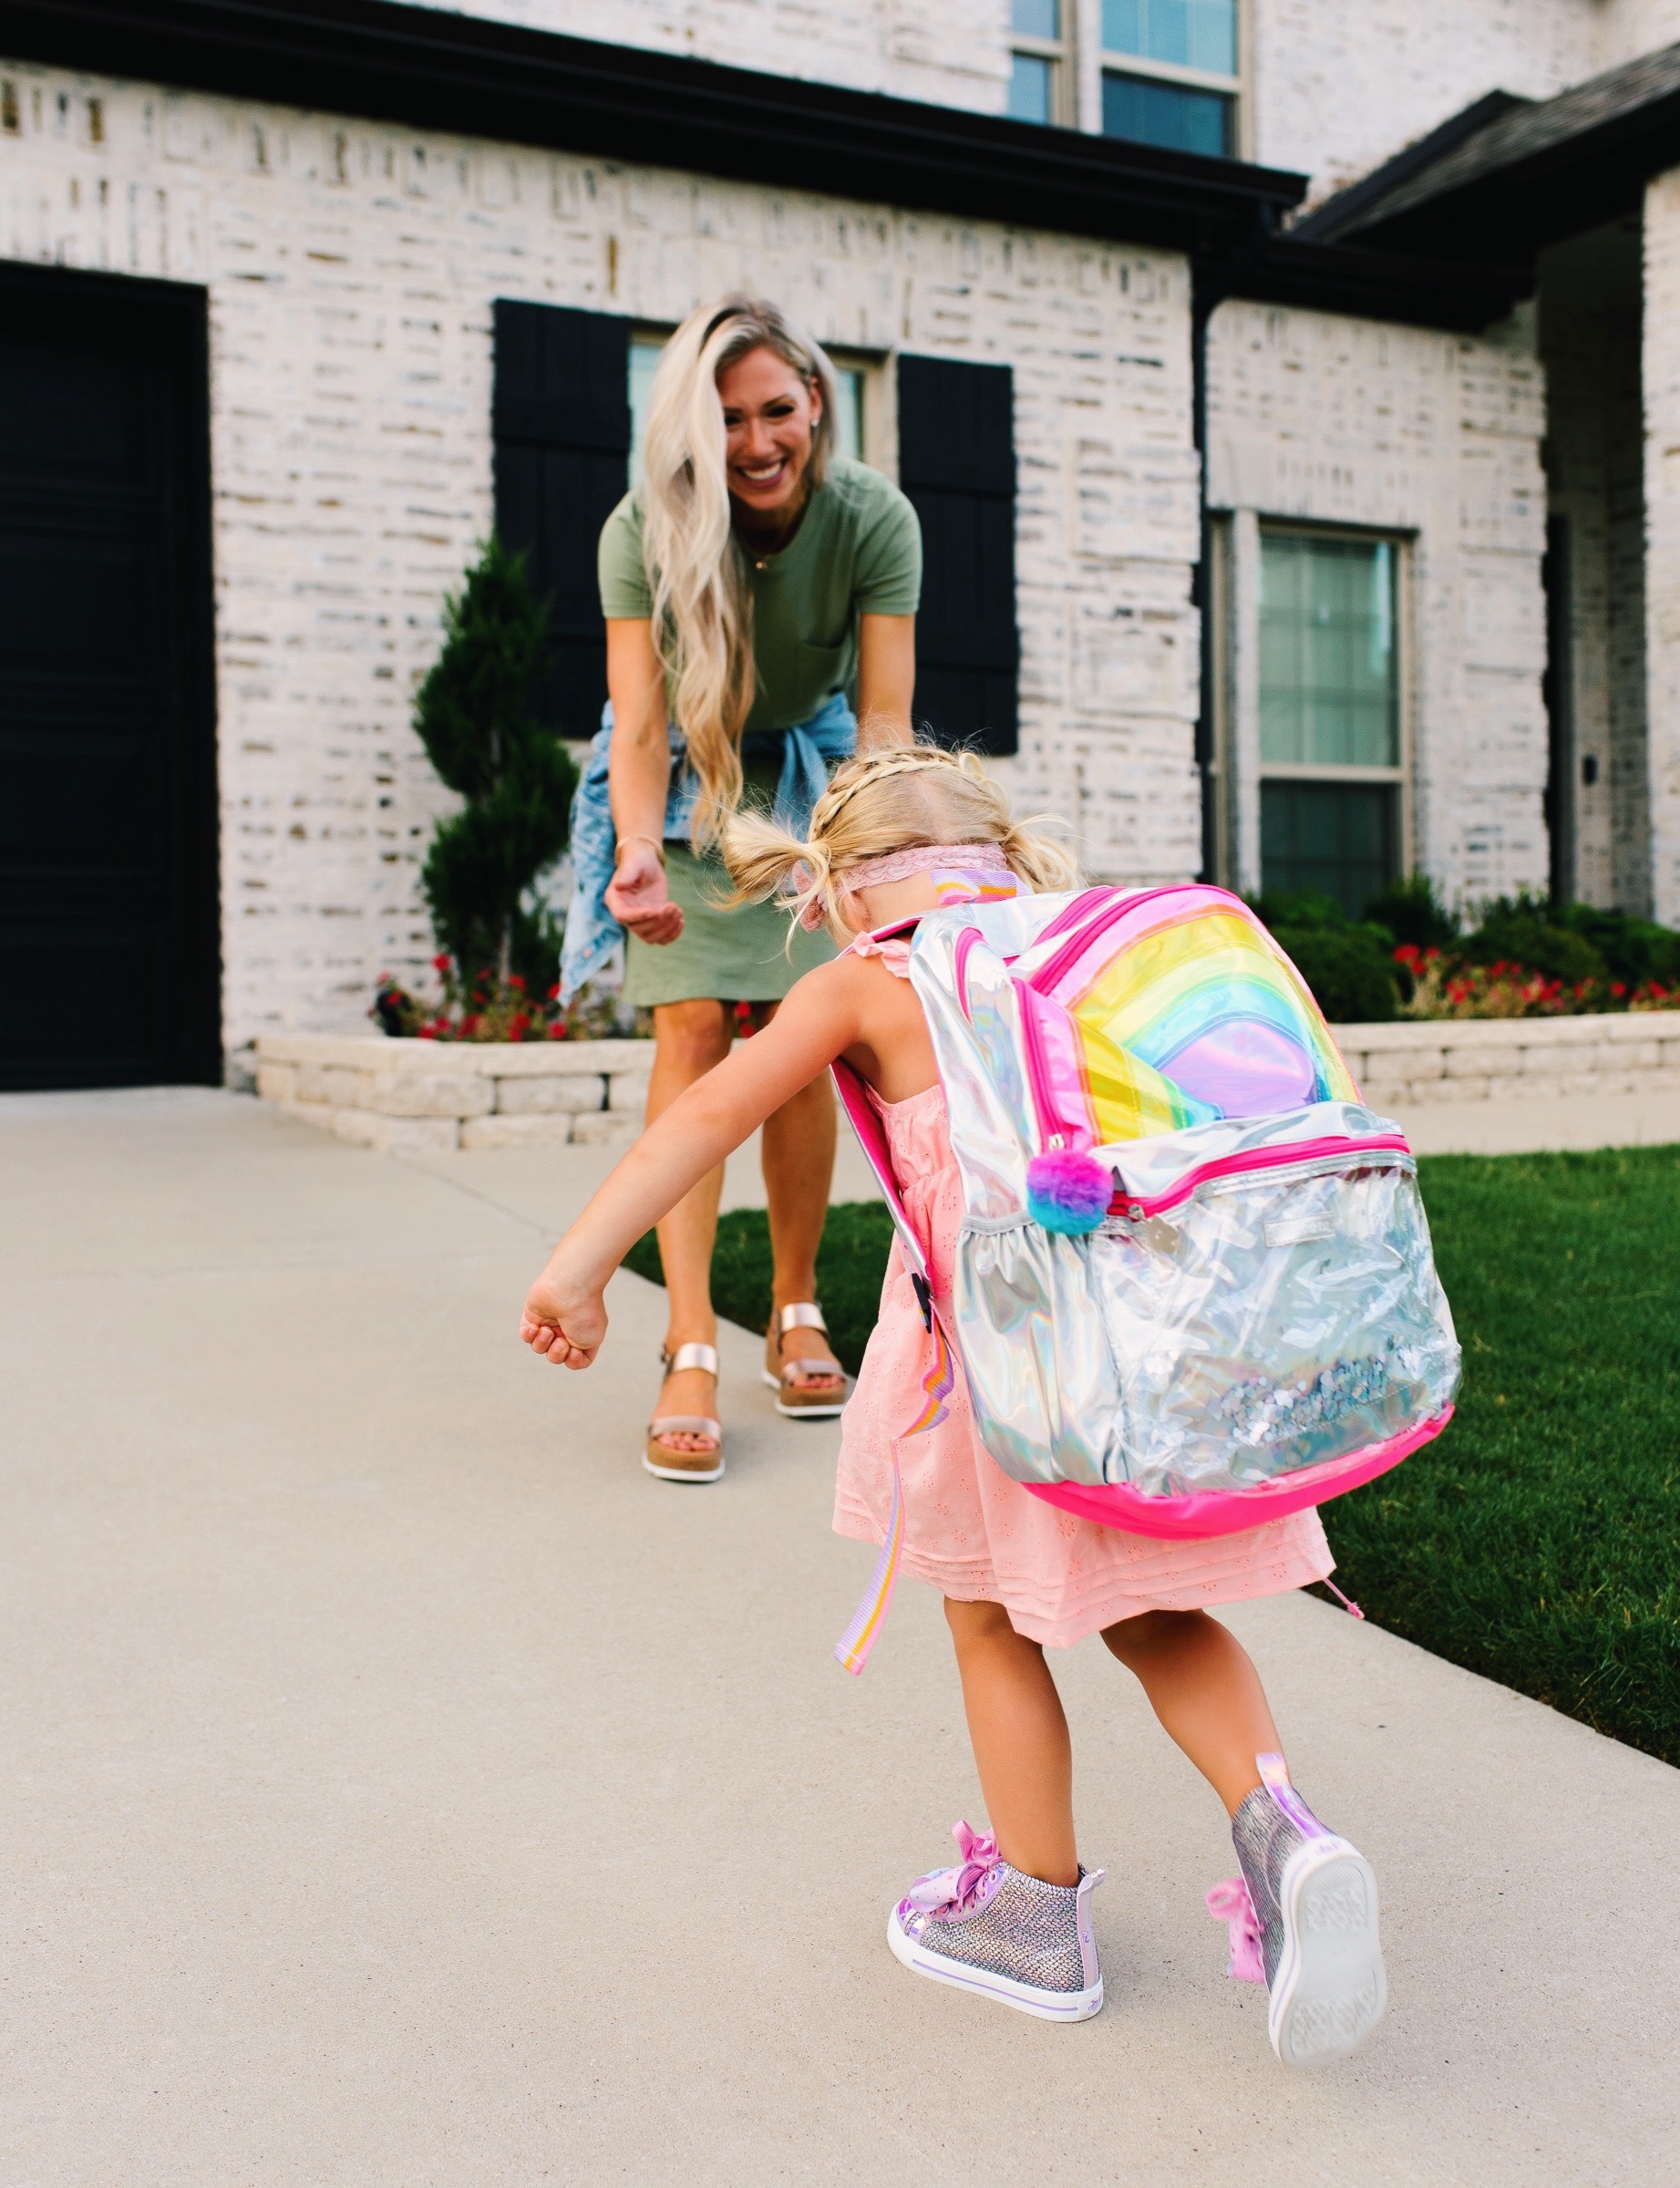 Back To School with Pottery Barn Kids – Hello Ivory Rose